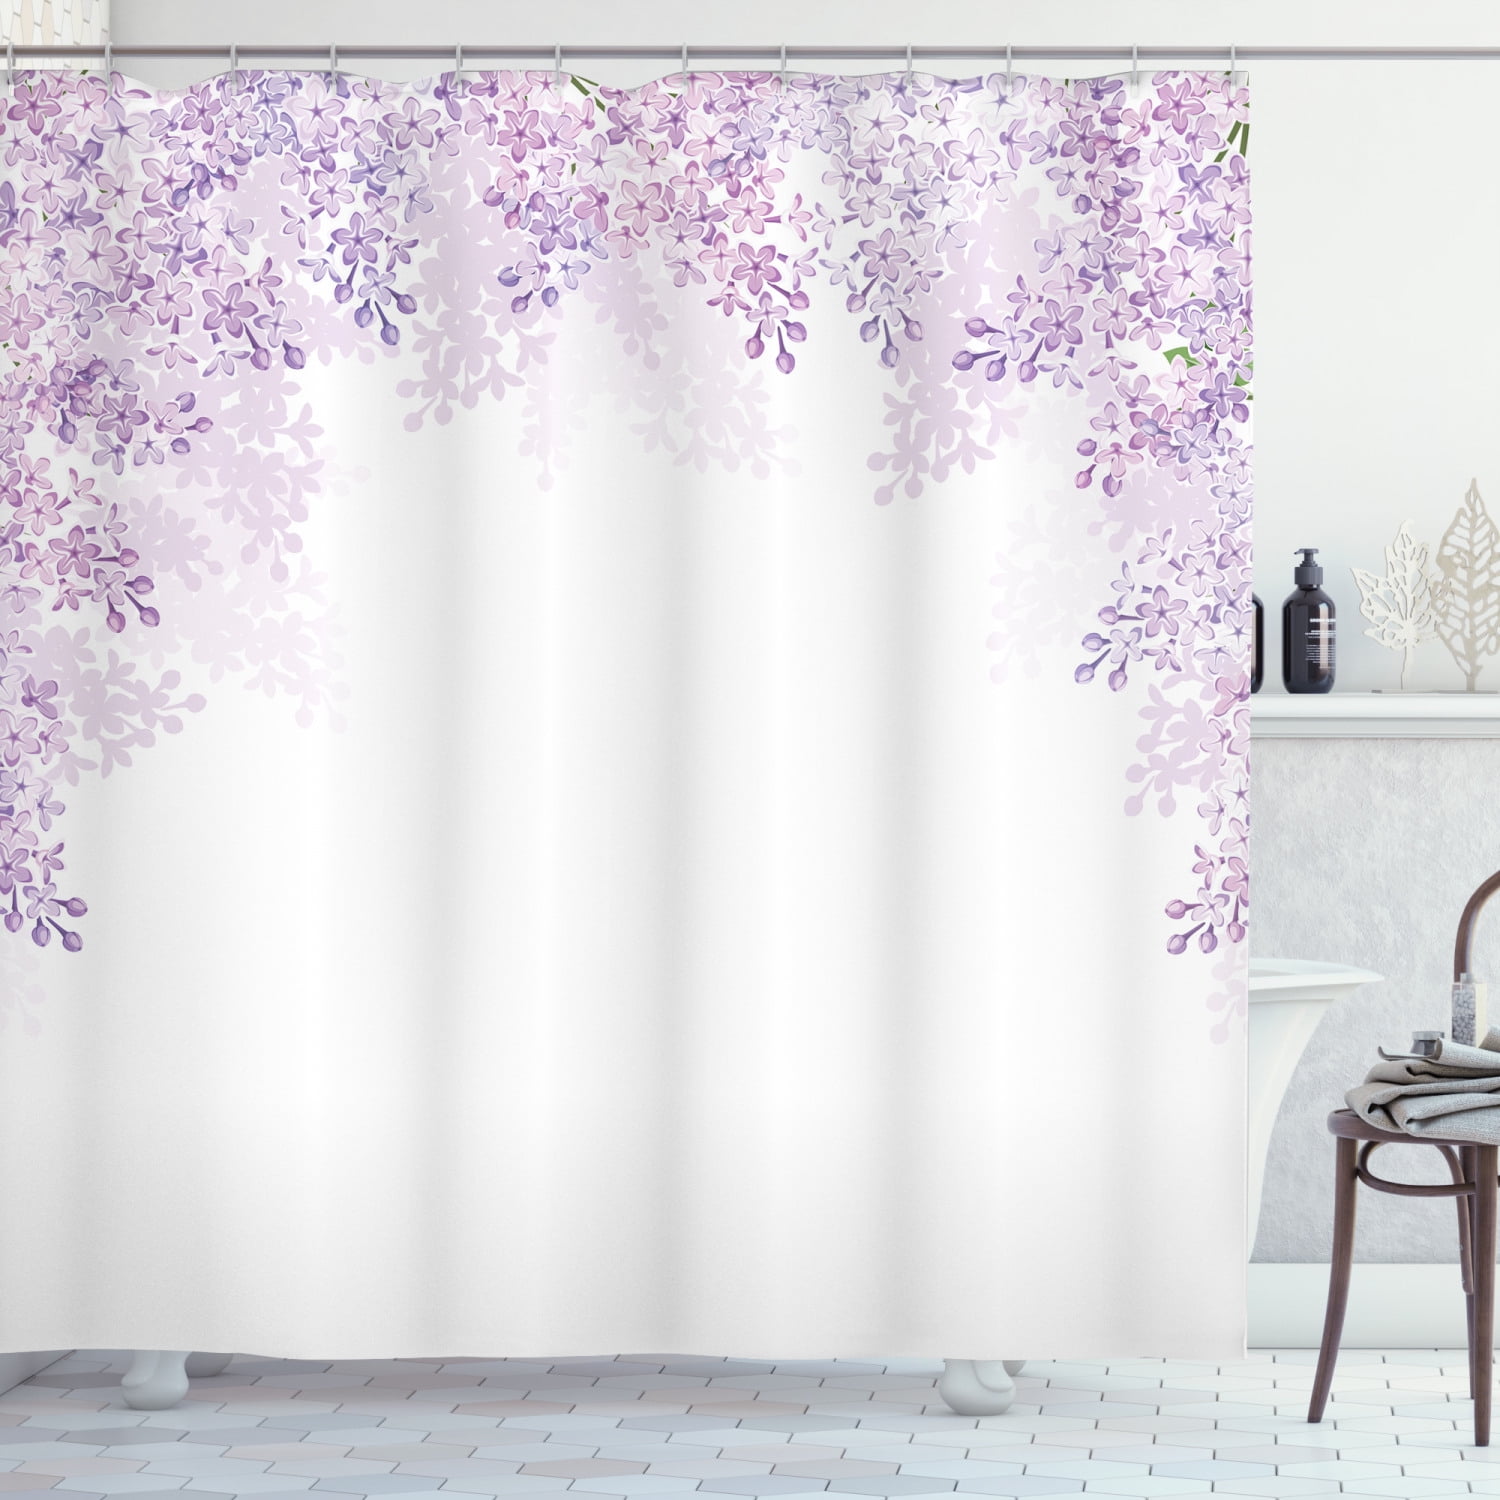 Branch of Lilac & Butterfly Shower Curtain Set Bathroom Waterproof Polyester 71" 